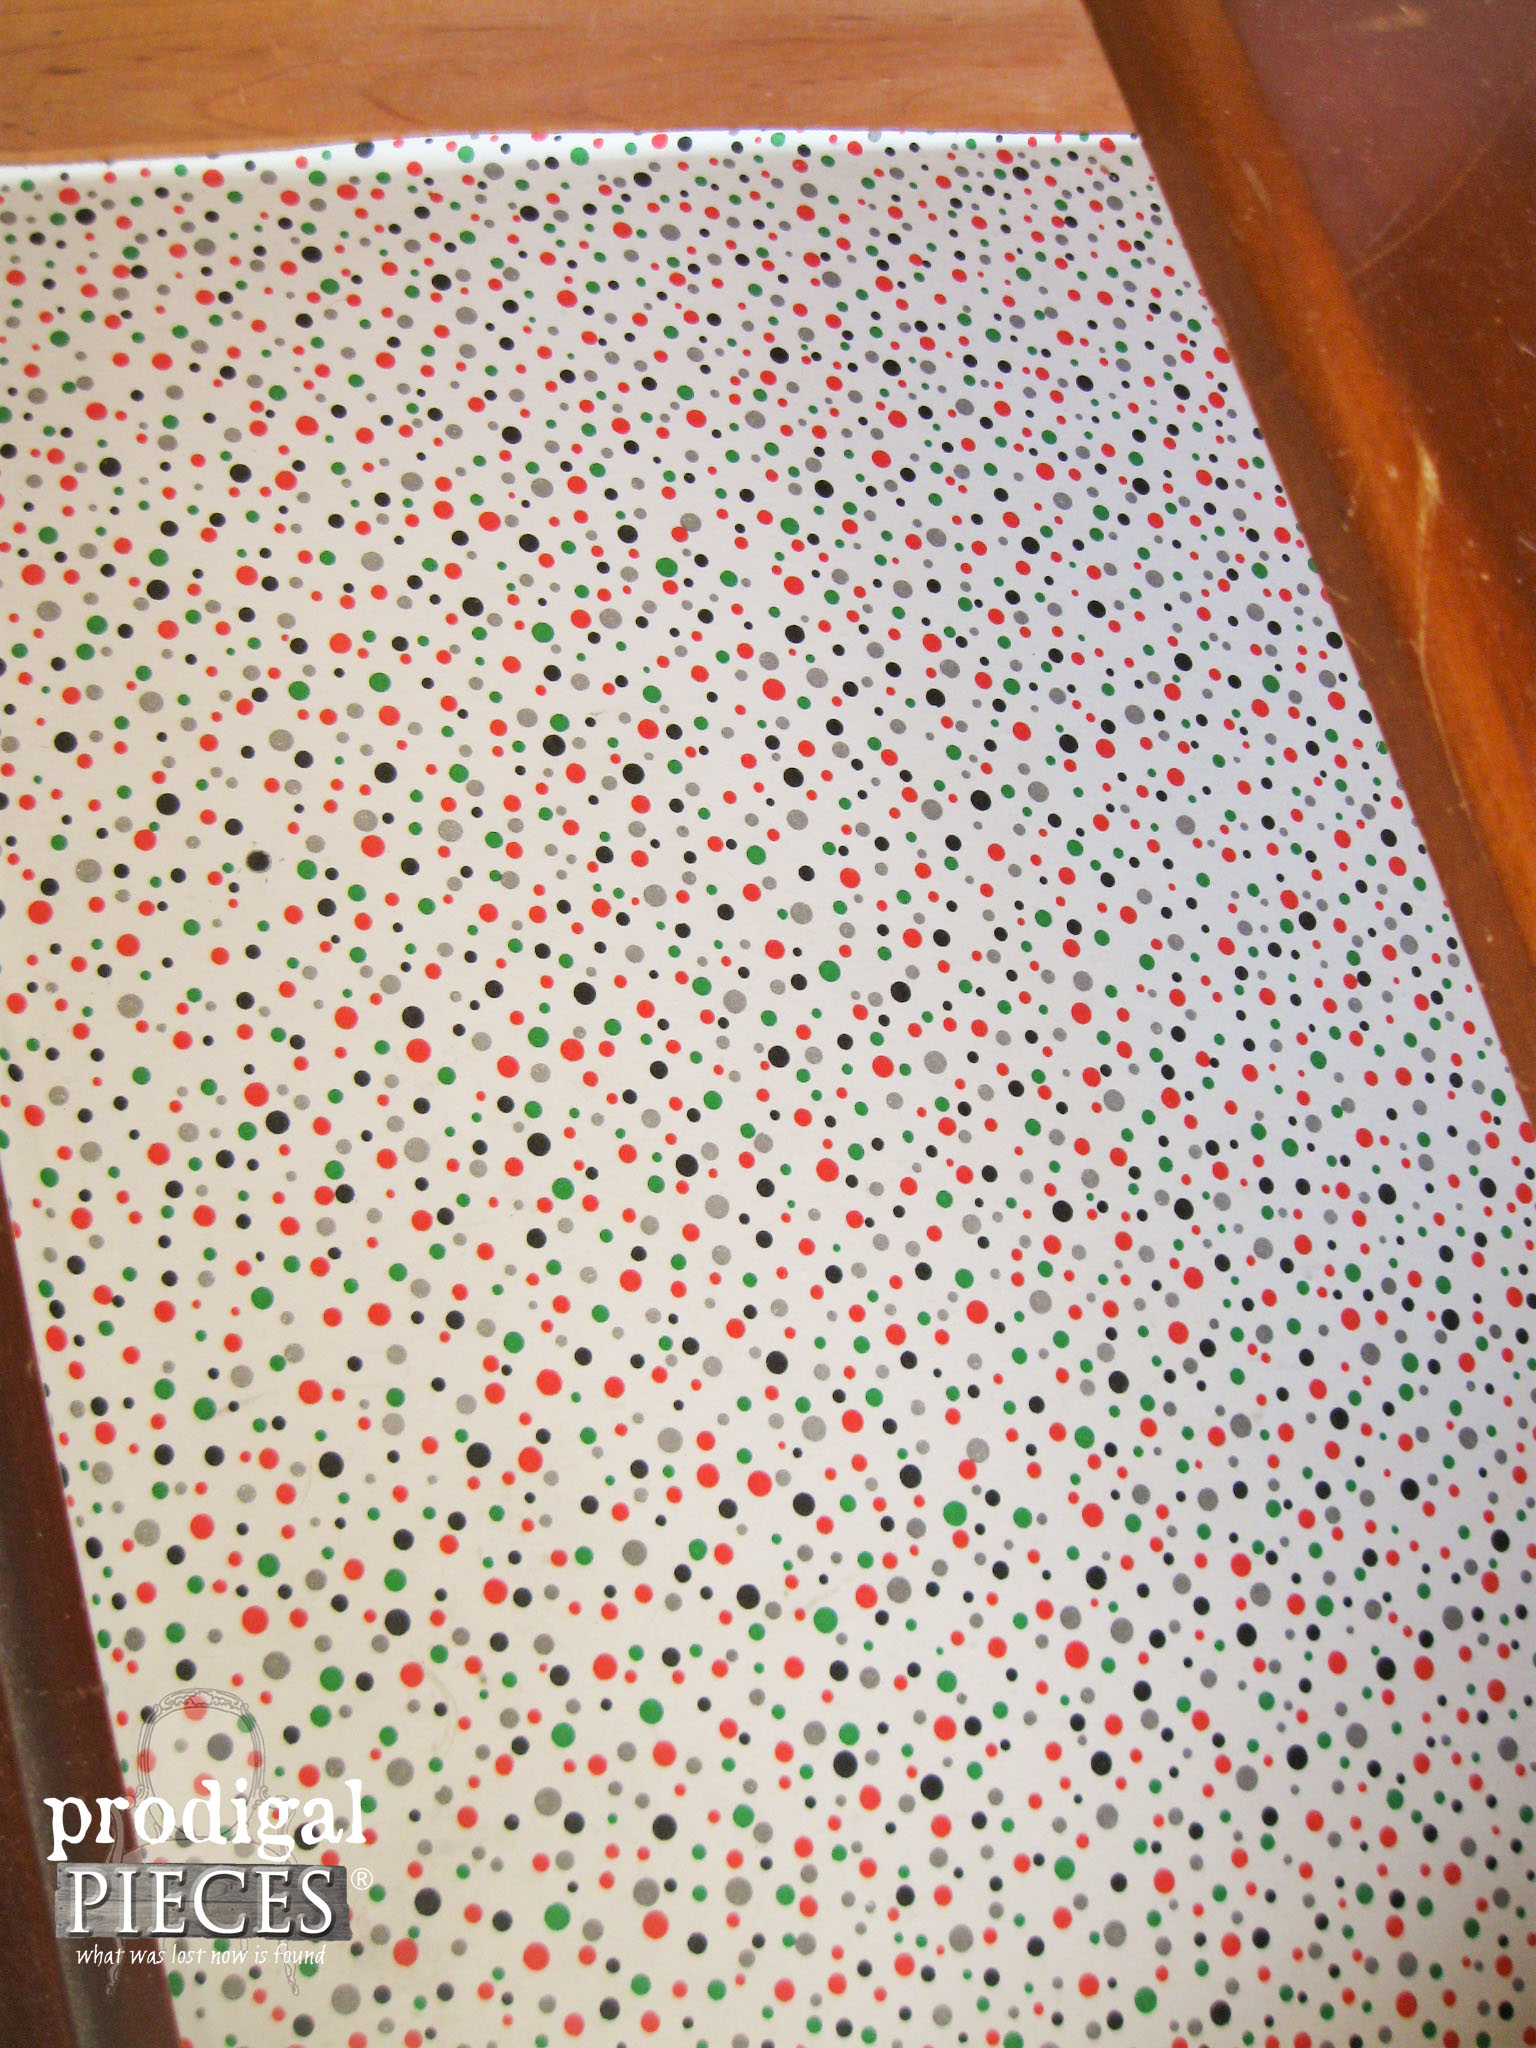 Vintage Polka Dot Contact Paper for Drawer Lining | Prodigal Pieces | www.prodigalpieces.com